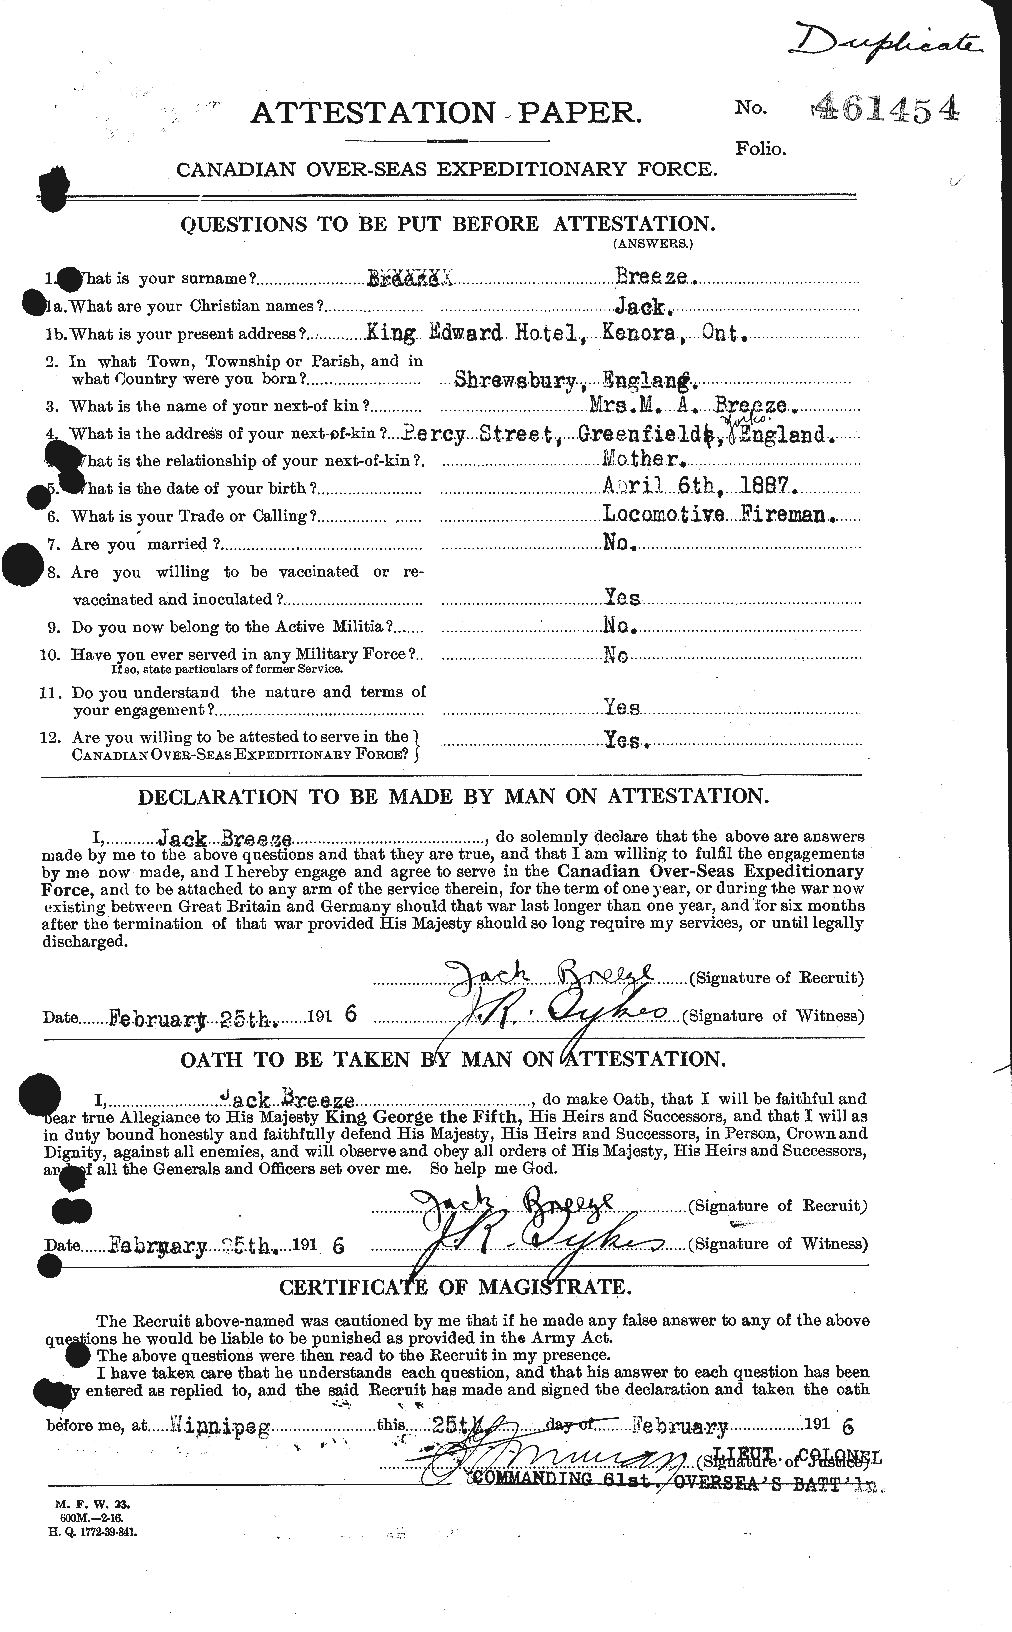 Personnel Records of the First World War - CEF 263592a